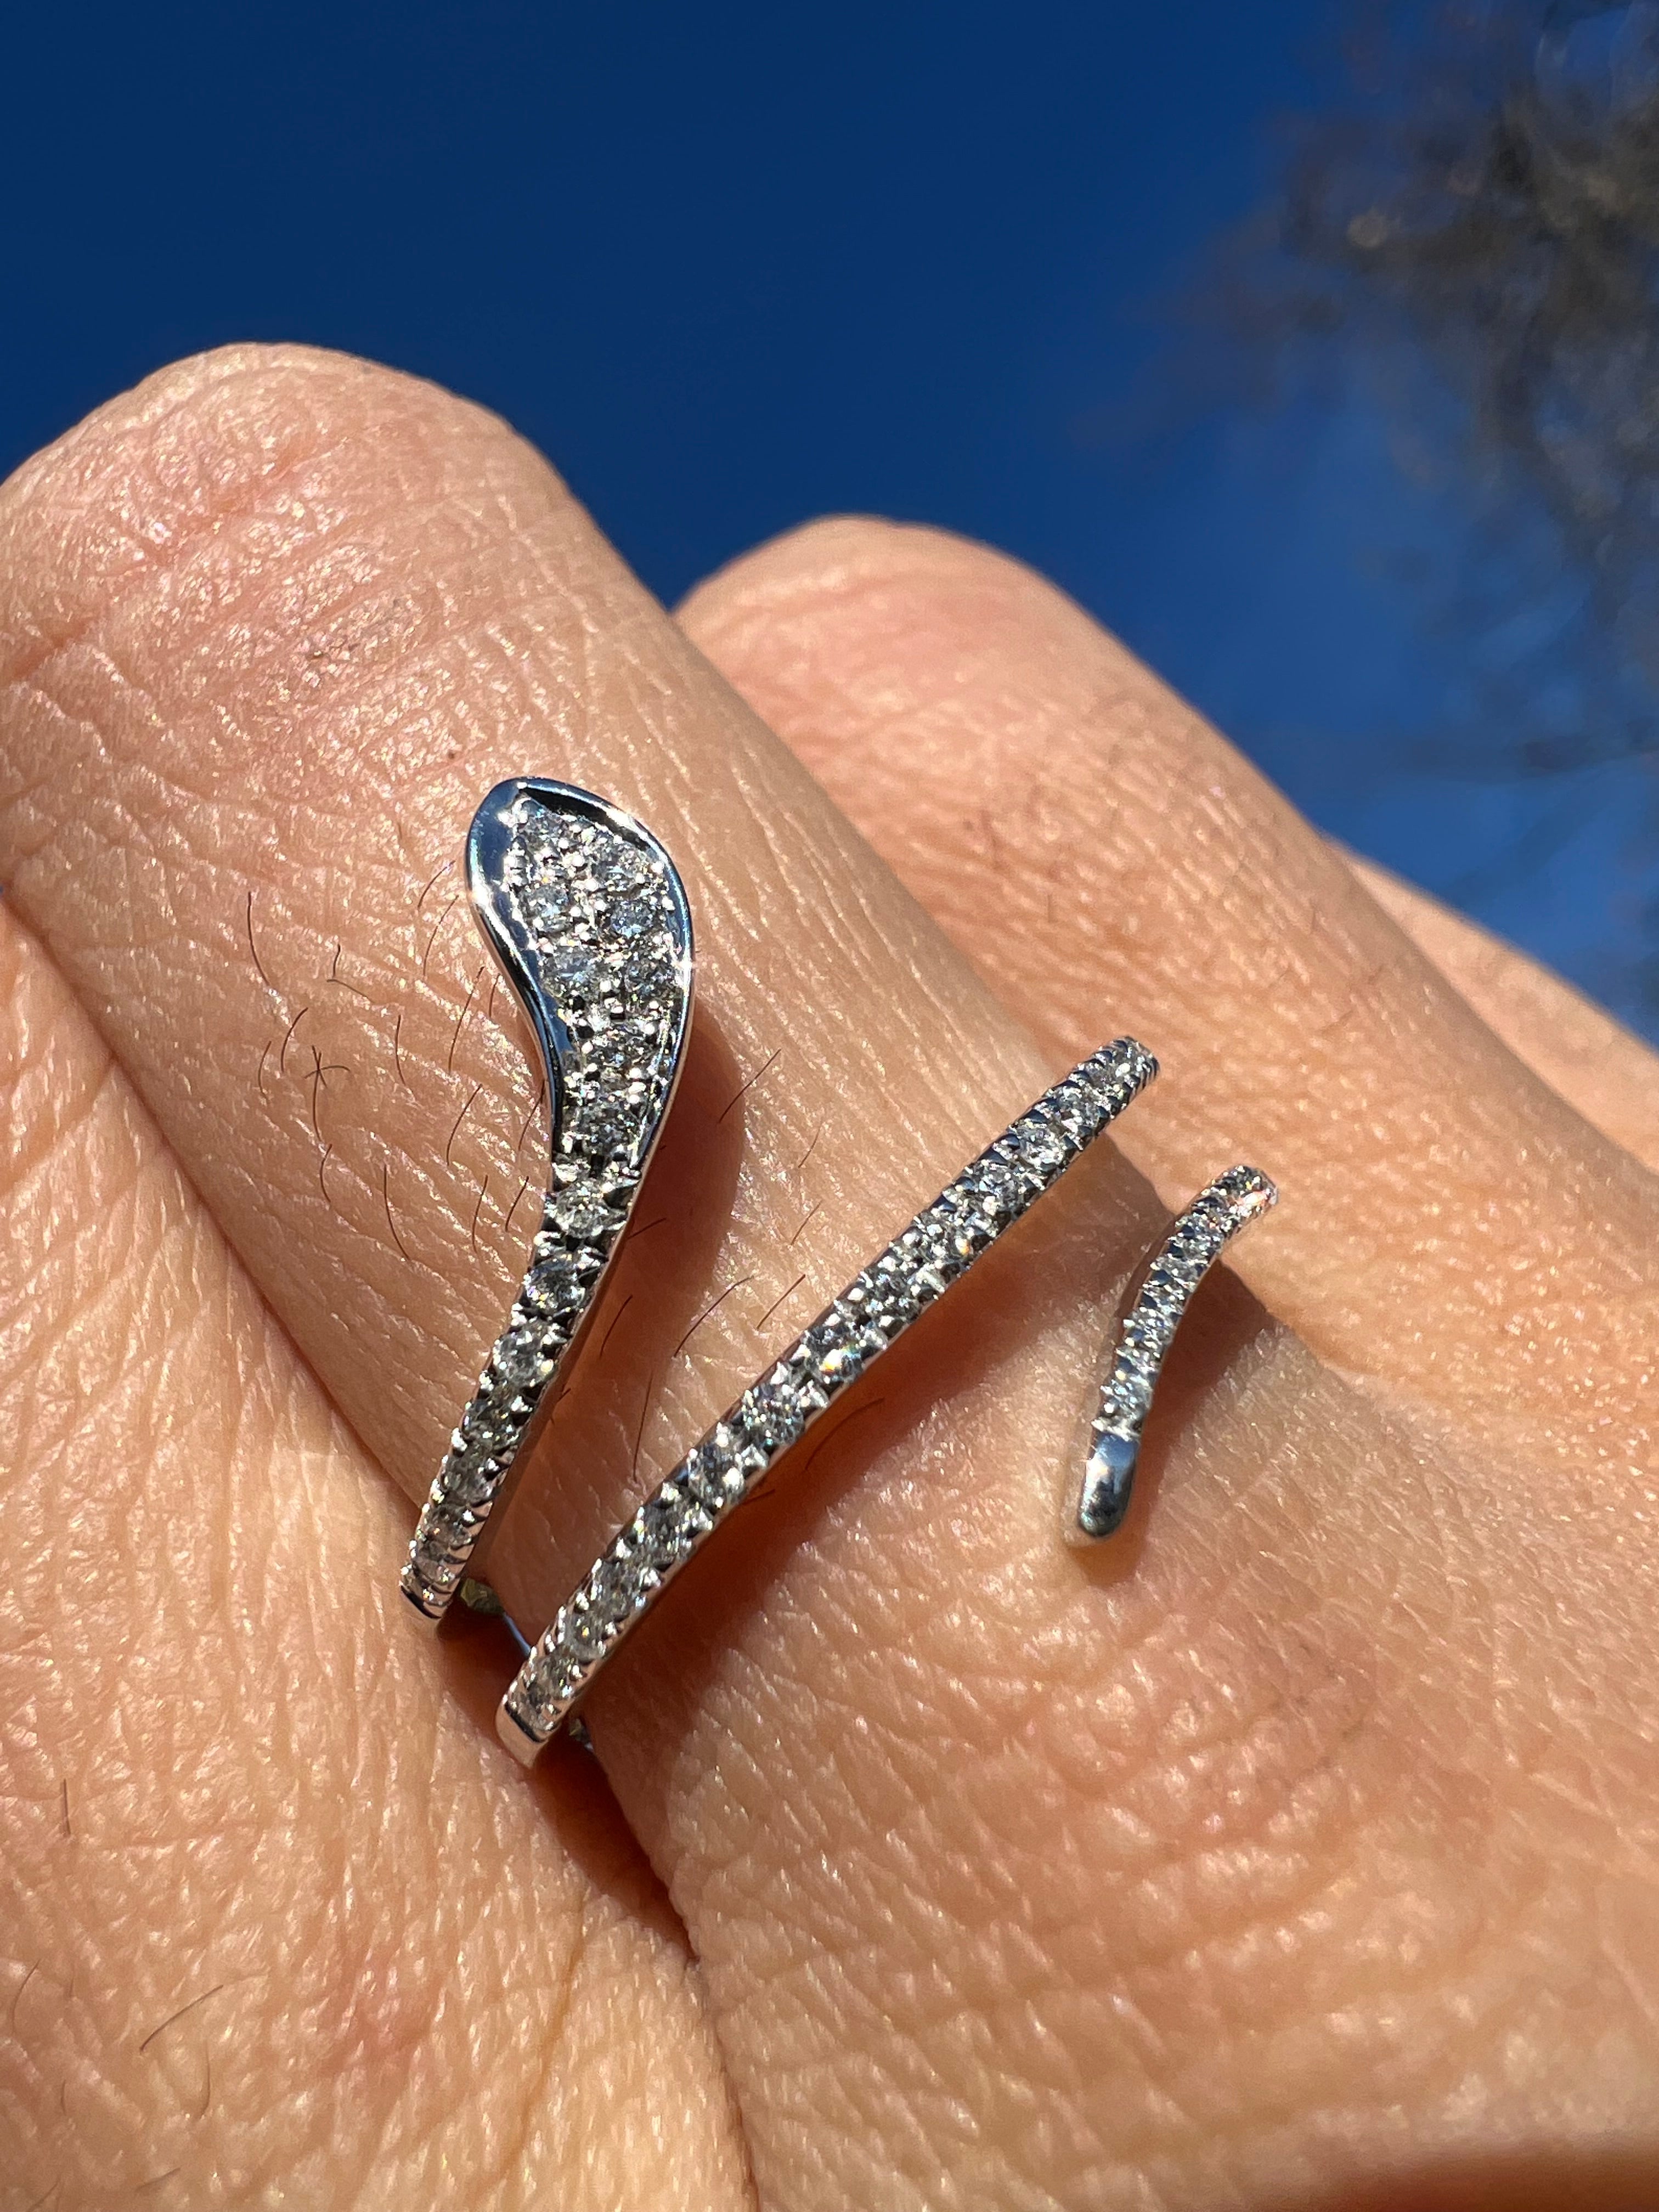 Coiled Snake Ring: 18K White Gold with Diamonds